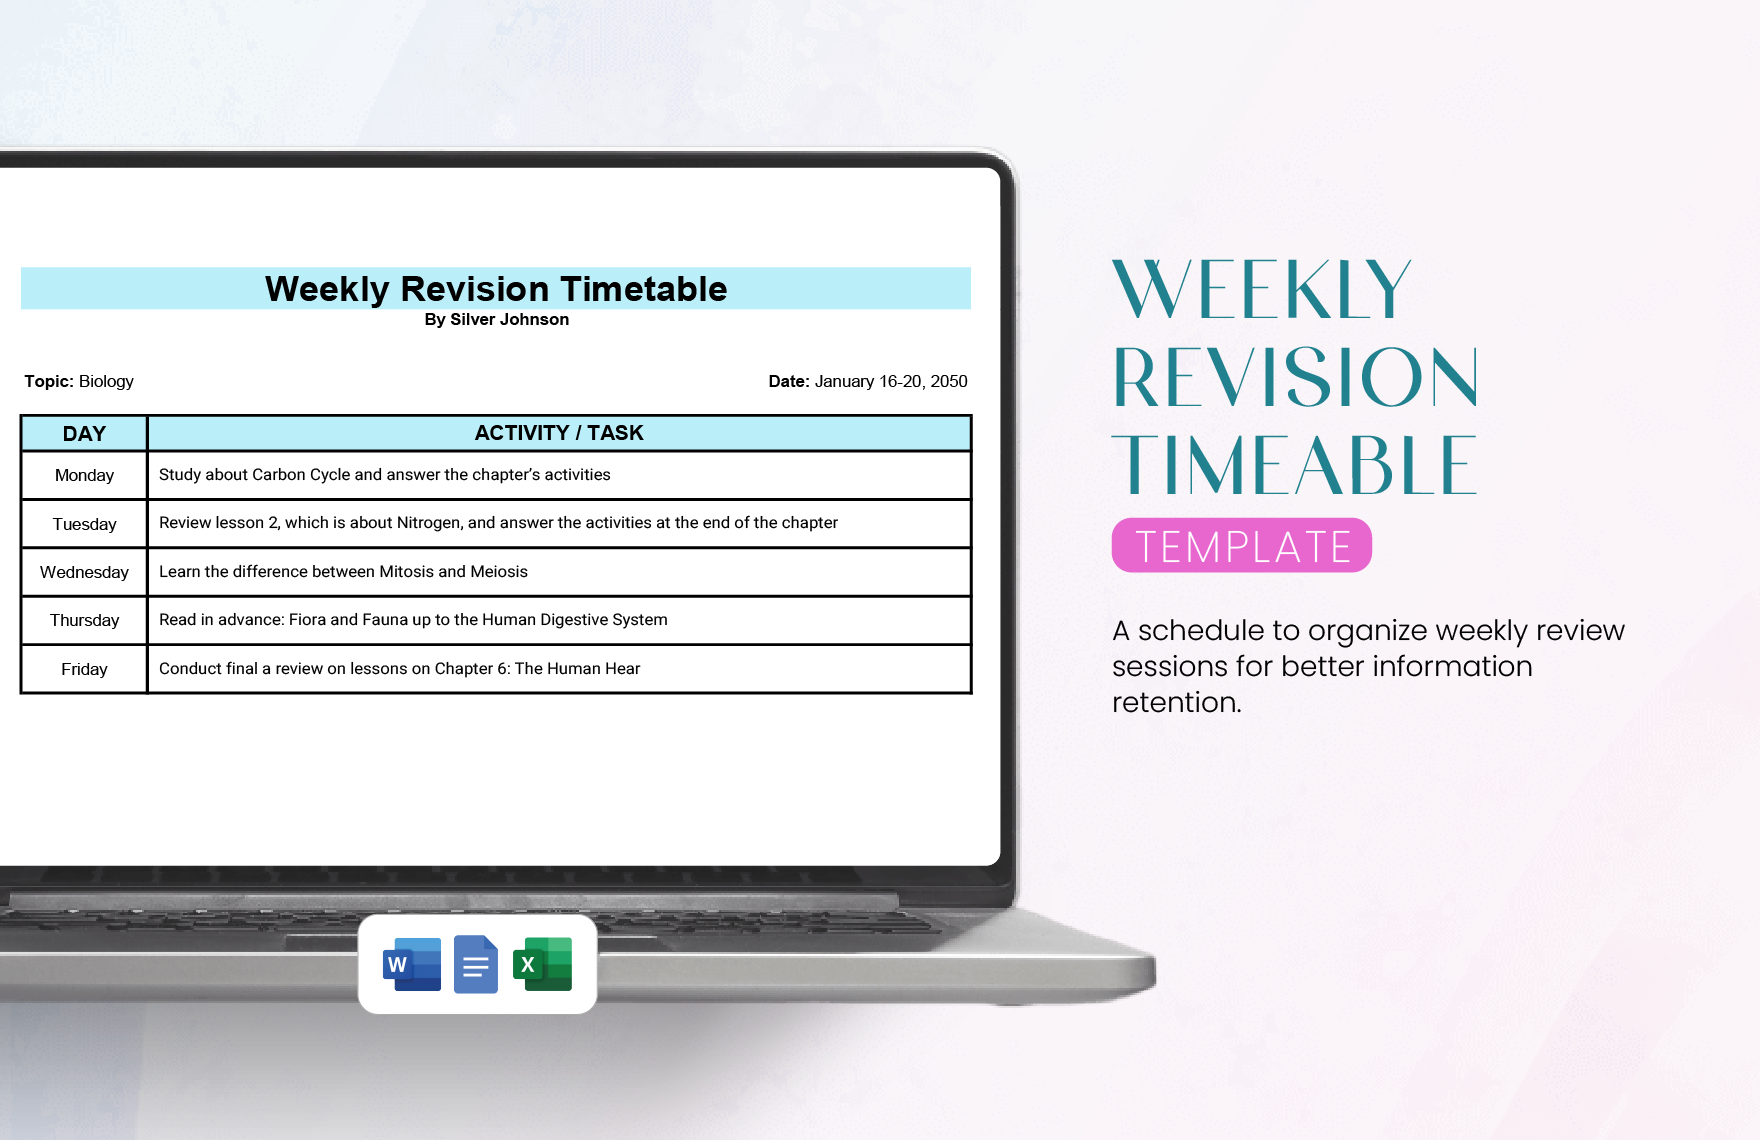 Weekly Revision Timetable Template in Word, Google Docs, Excel